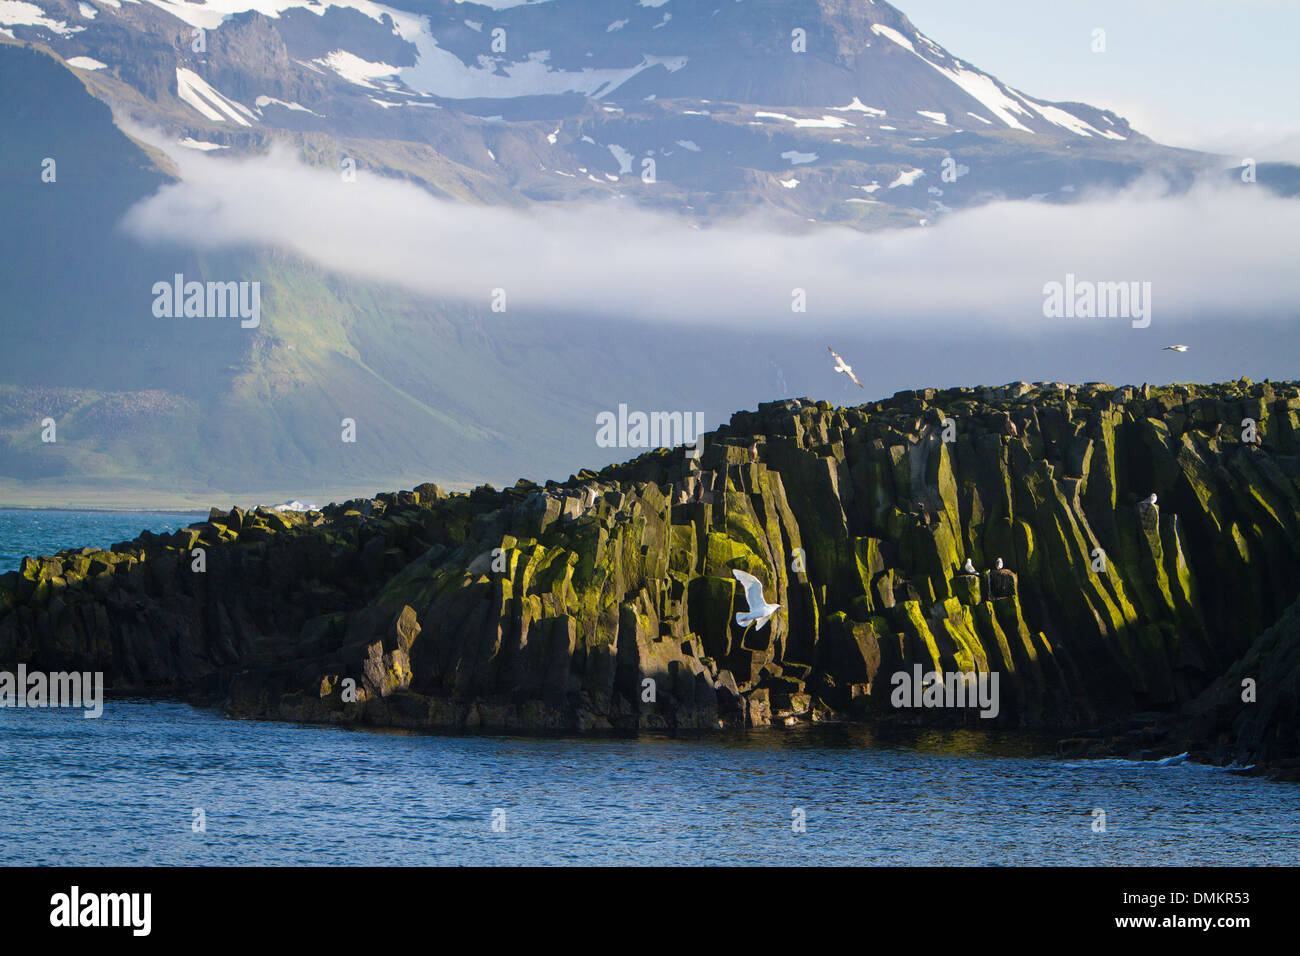 MELRAKKAEY ISLAND, PROTECTED SITE AT THE MOUTH OF THE GRUNDAFJORDUR BAY, A VERITABLE PARADISE FOR MARINE BIRDS, WITH MOUNT KIRKJUFELL IN THE BACKGROUND, GRUNDARFJORDUR, SNAEFELLSNES PENINSULA, WESTERN ICELAND, EUROPE Stock Photo